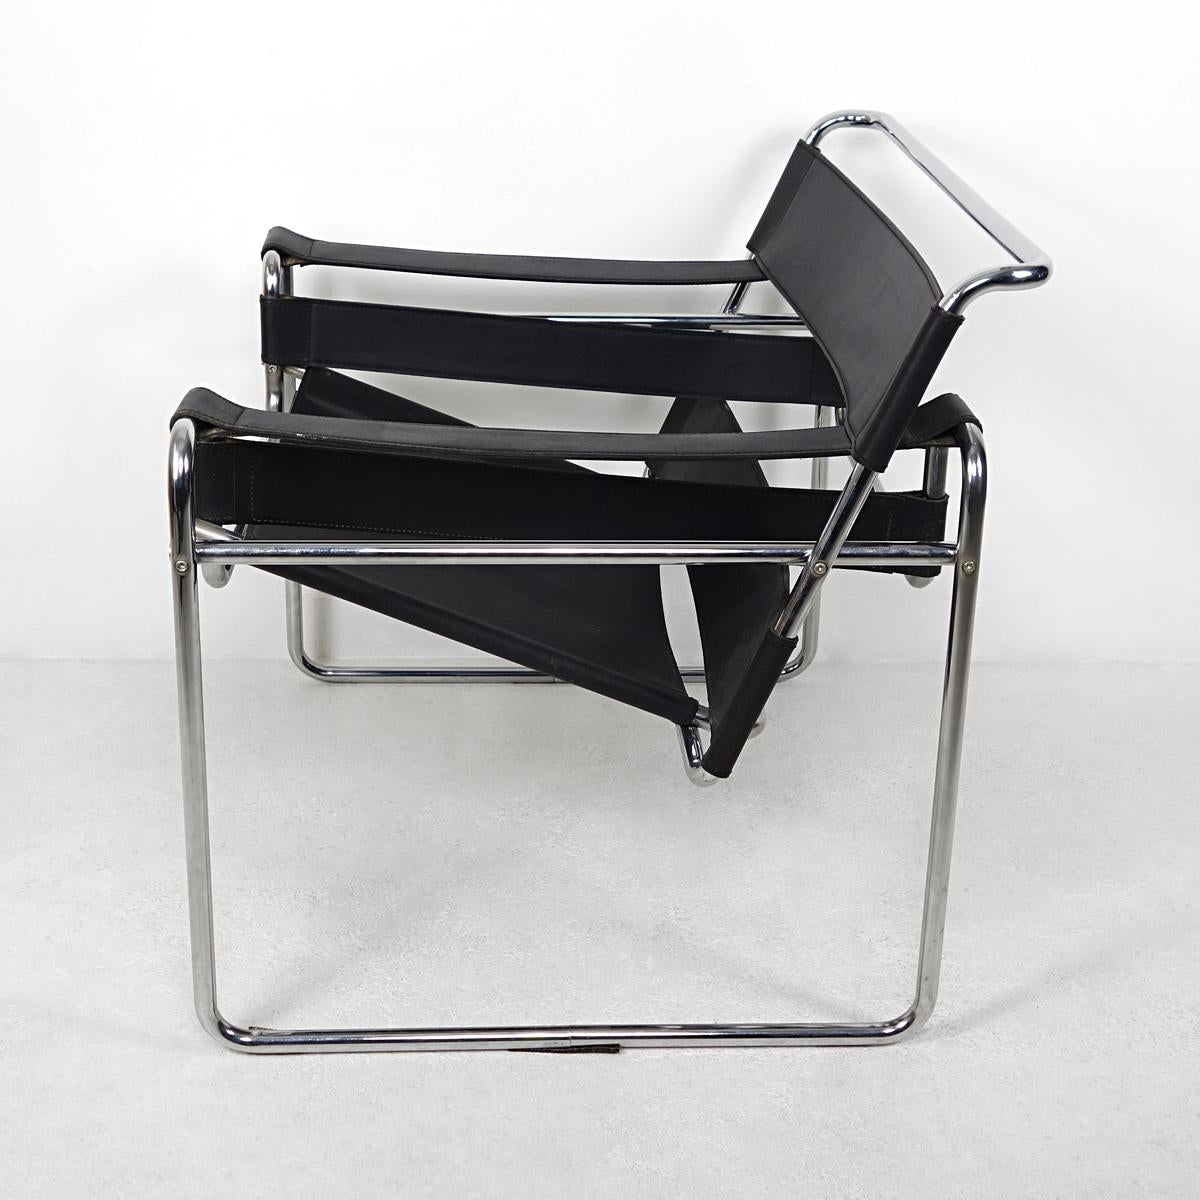 The Wassily chair, also known as the B3 Chair, was designed by Marcel Breuer in 1925 while he was working at the Bauhaus.
The design was revolutionary in the use of material (bent tubular steel) and production method.